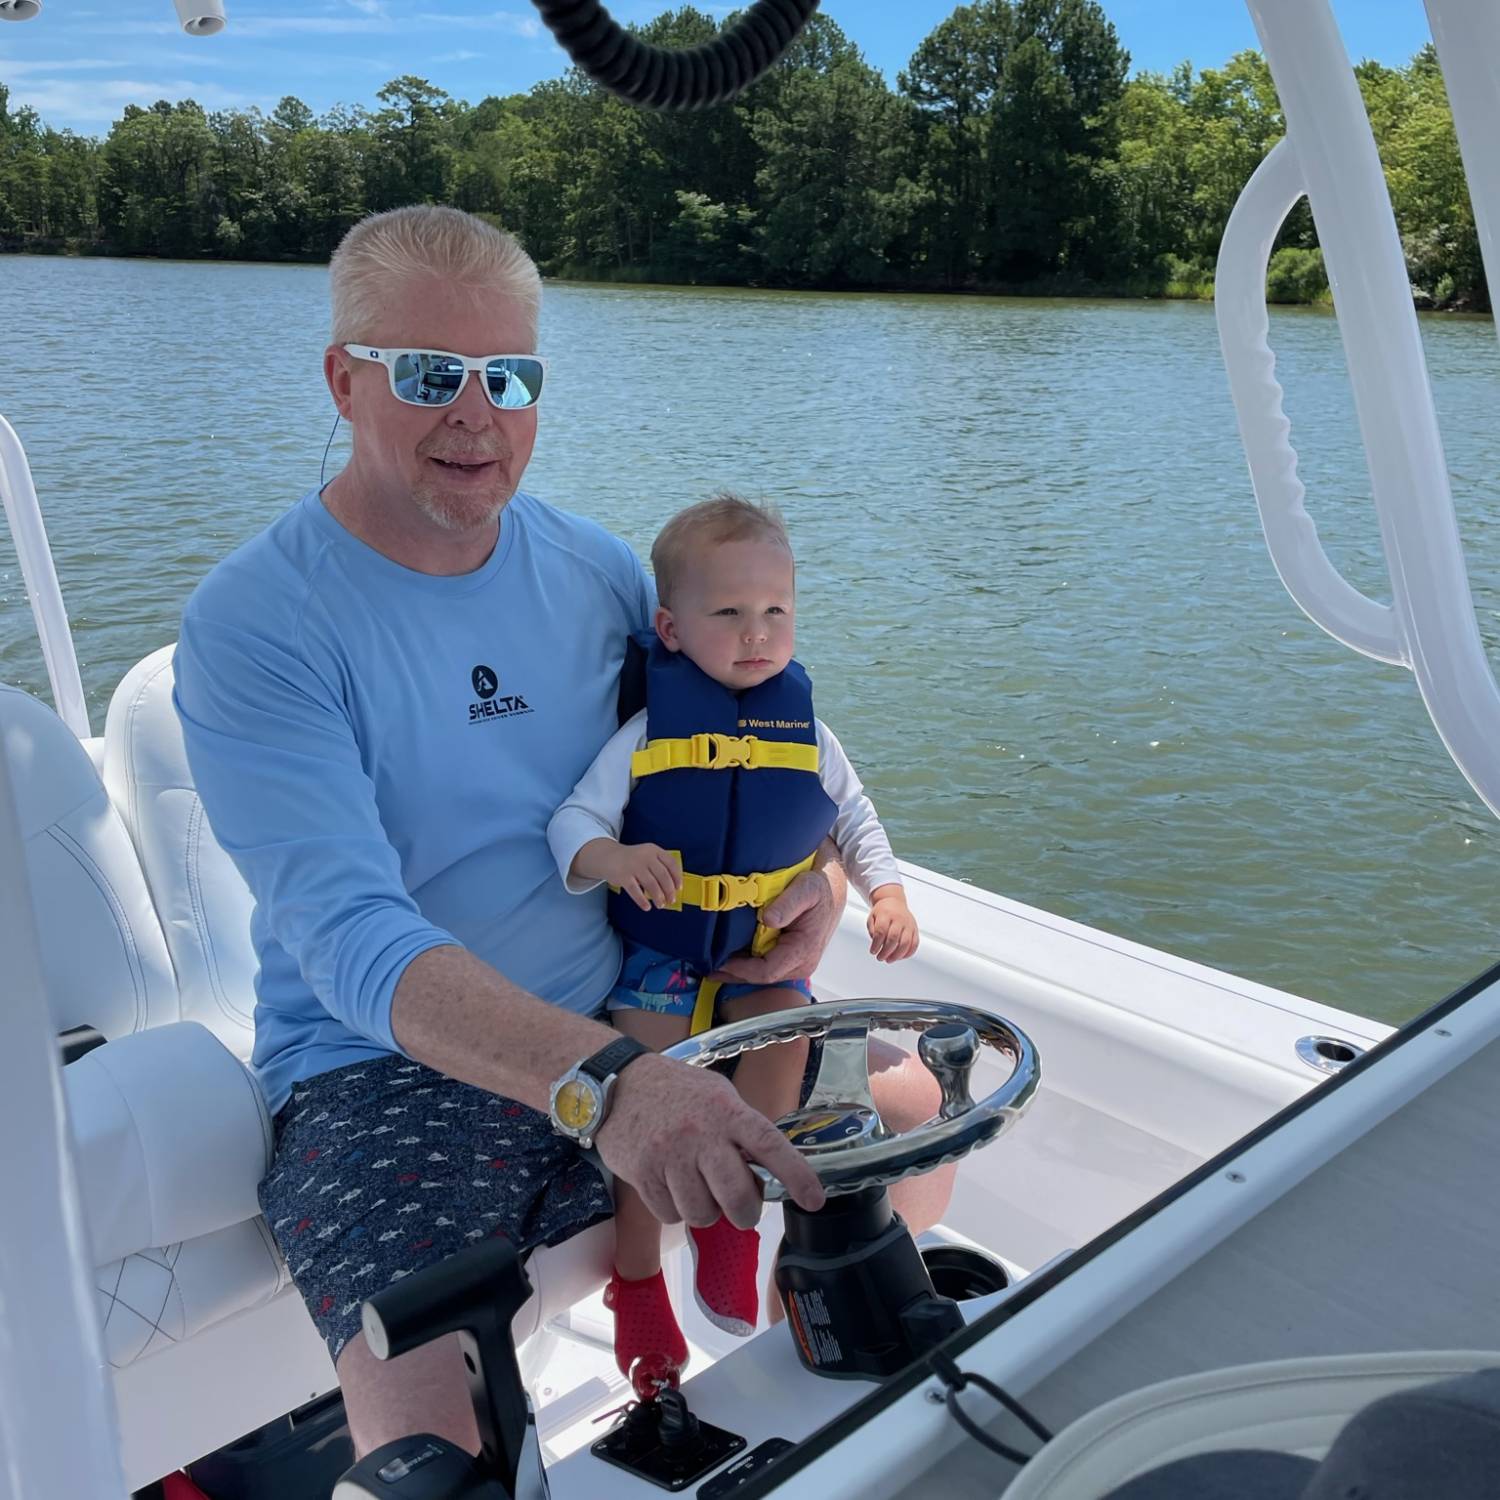 Title: First mate and Captain - On board their Sportsman Heritage 241 Center Console - Location: Reedville Va. Participating in the Photo Contest #SportsmanJuly